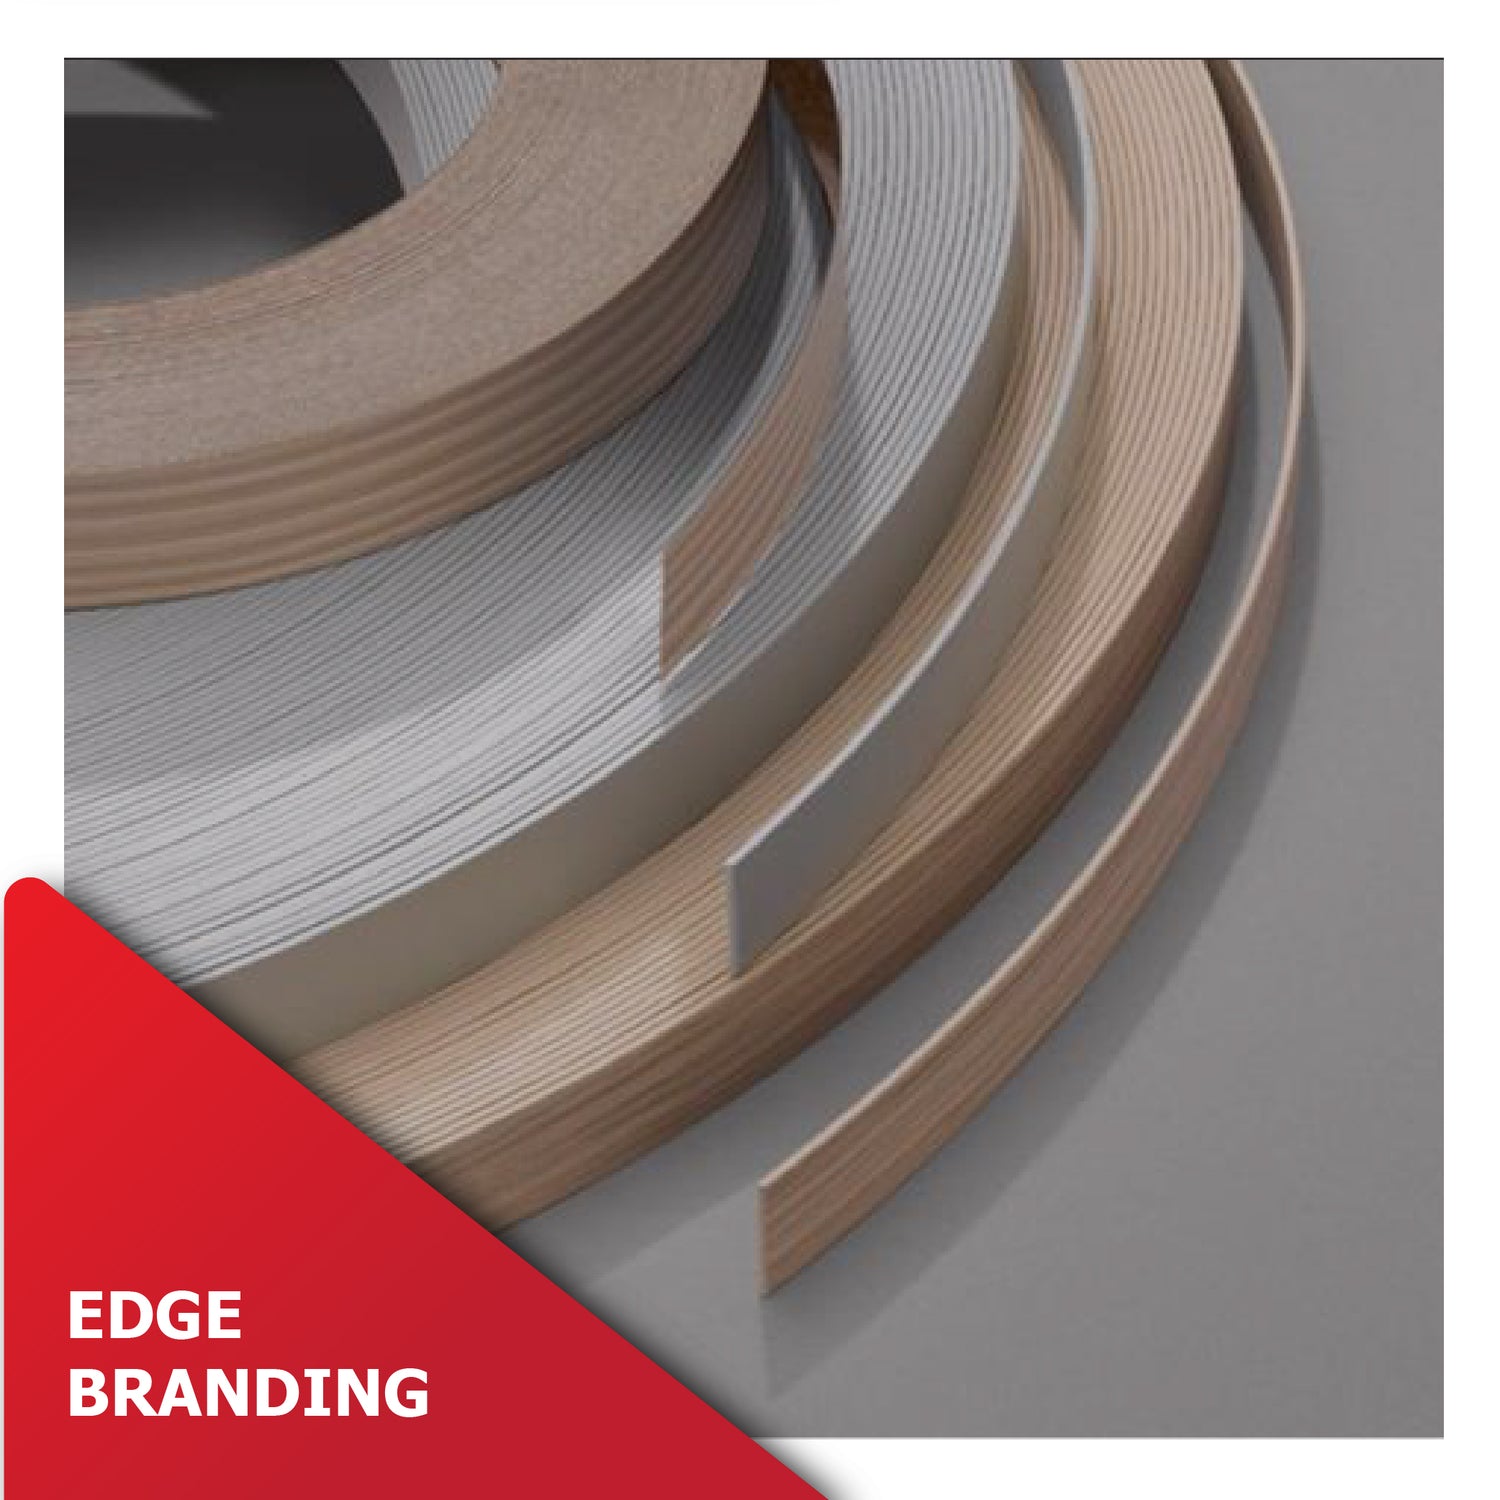 High-quality edge banding by M. M. Noorbhoy & Co - Enhance furniture with seamless finishes for a polished look.